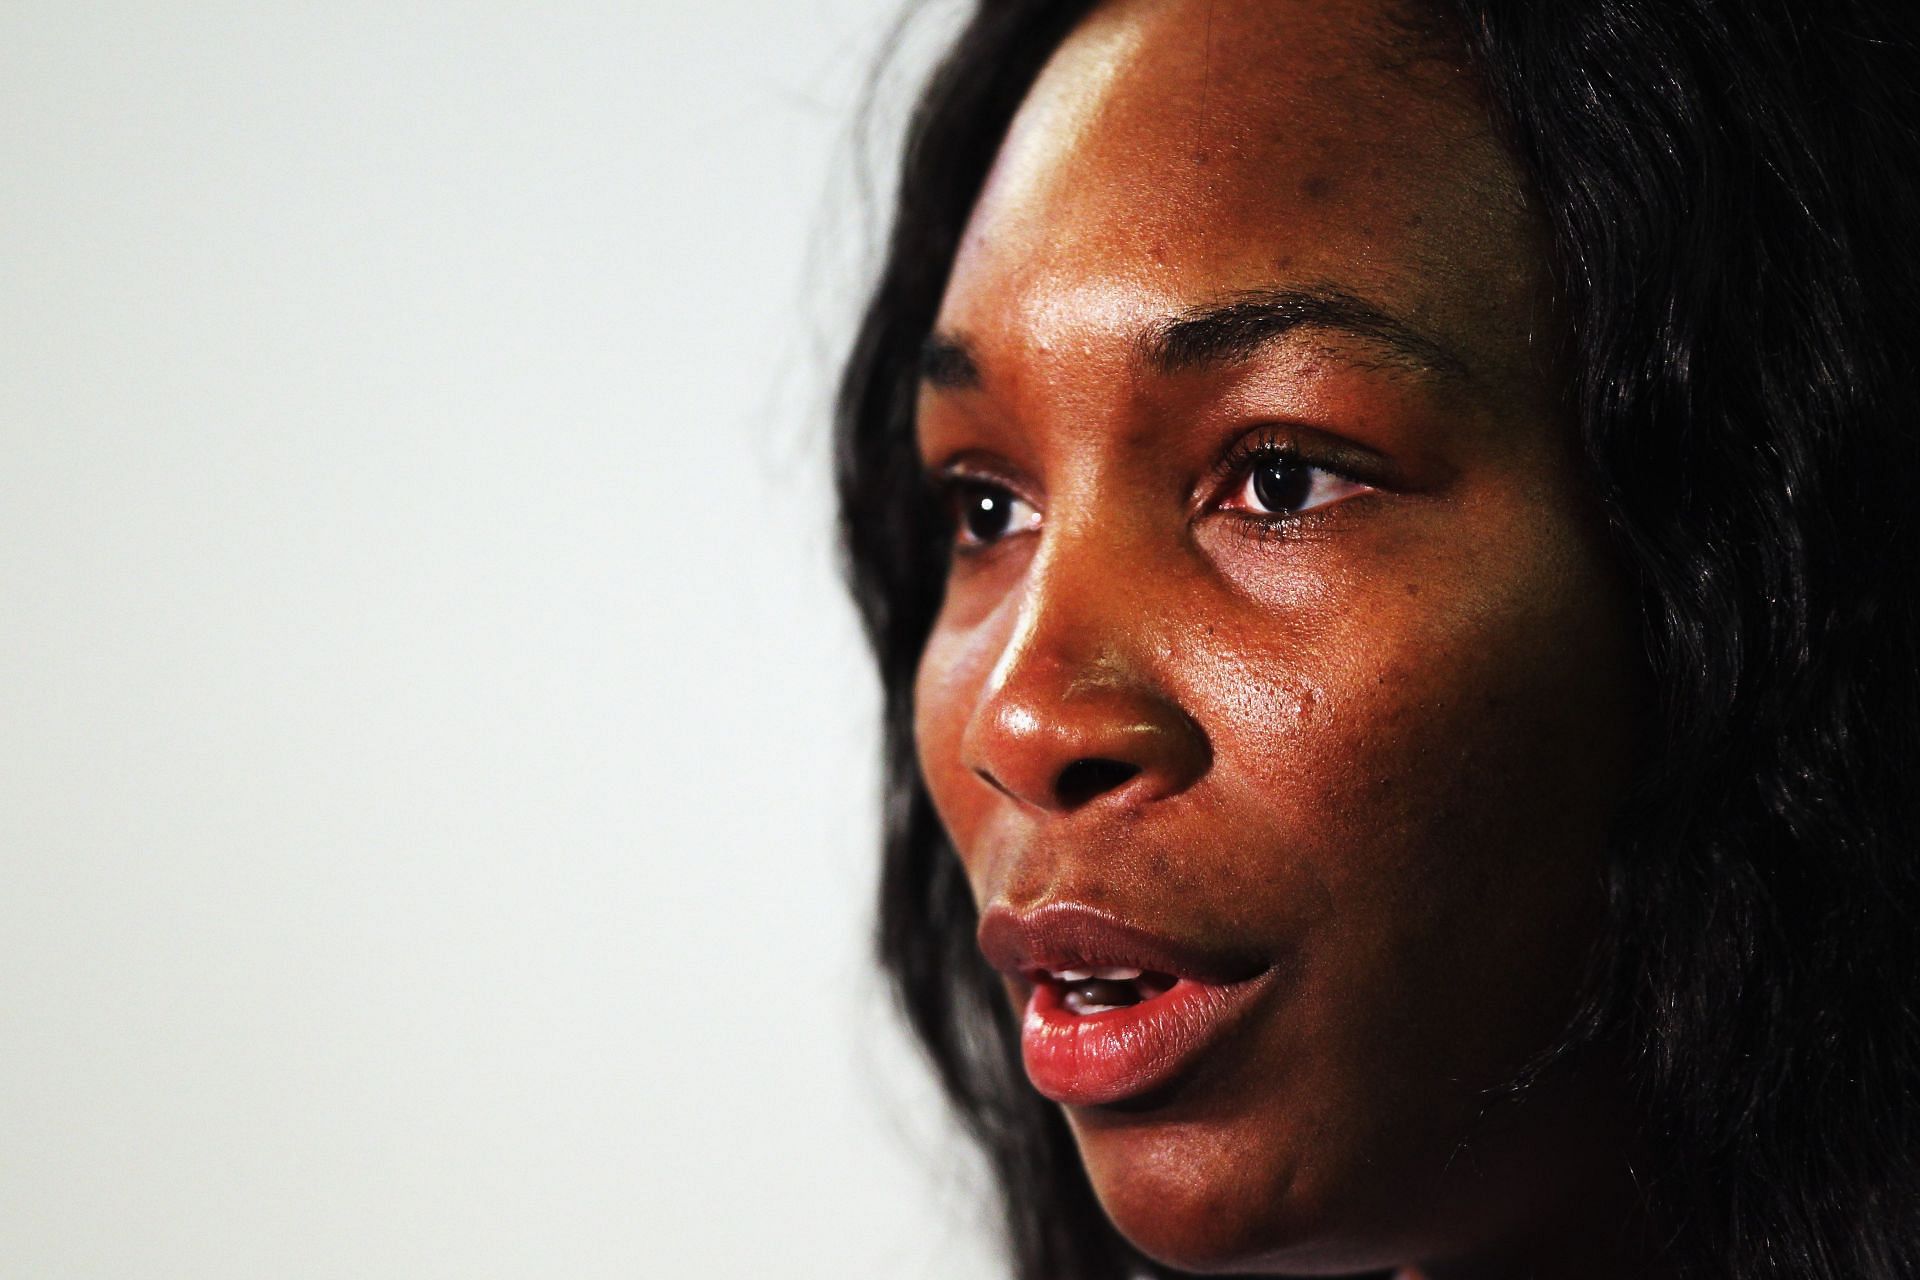 Venus Williams was cleared by the police